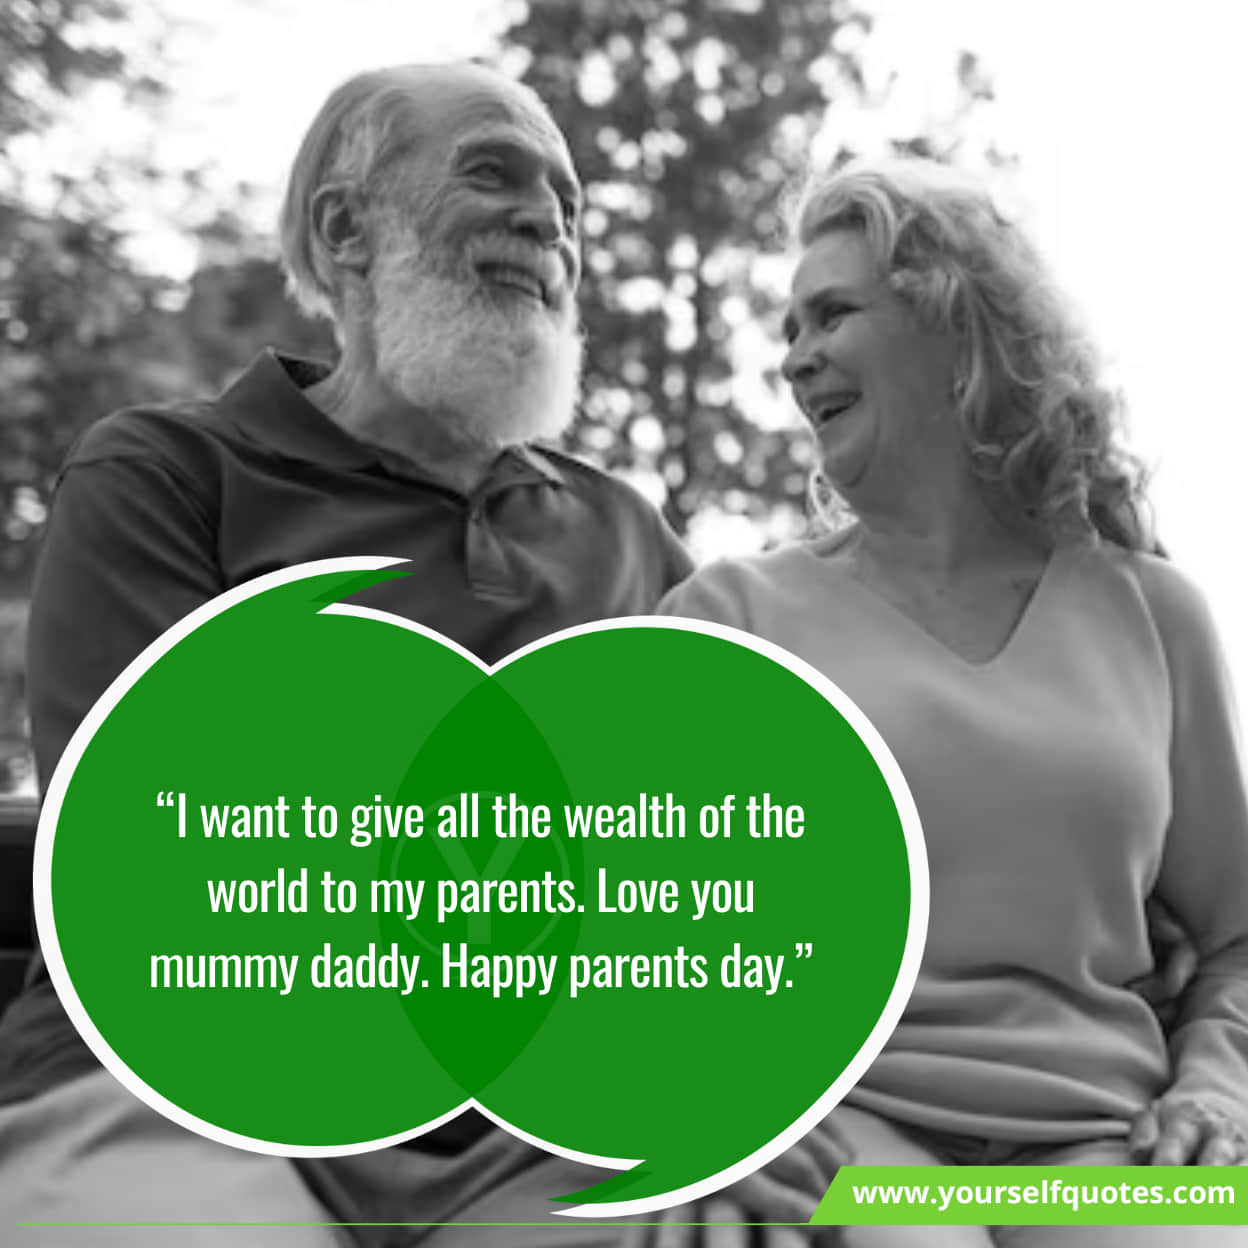 Parents Day Wishes Messages and Quotes With Love